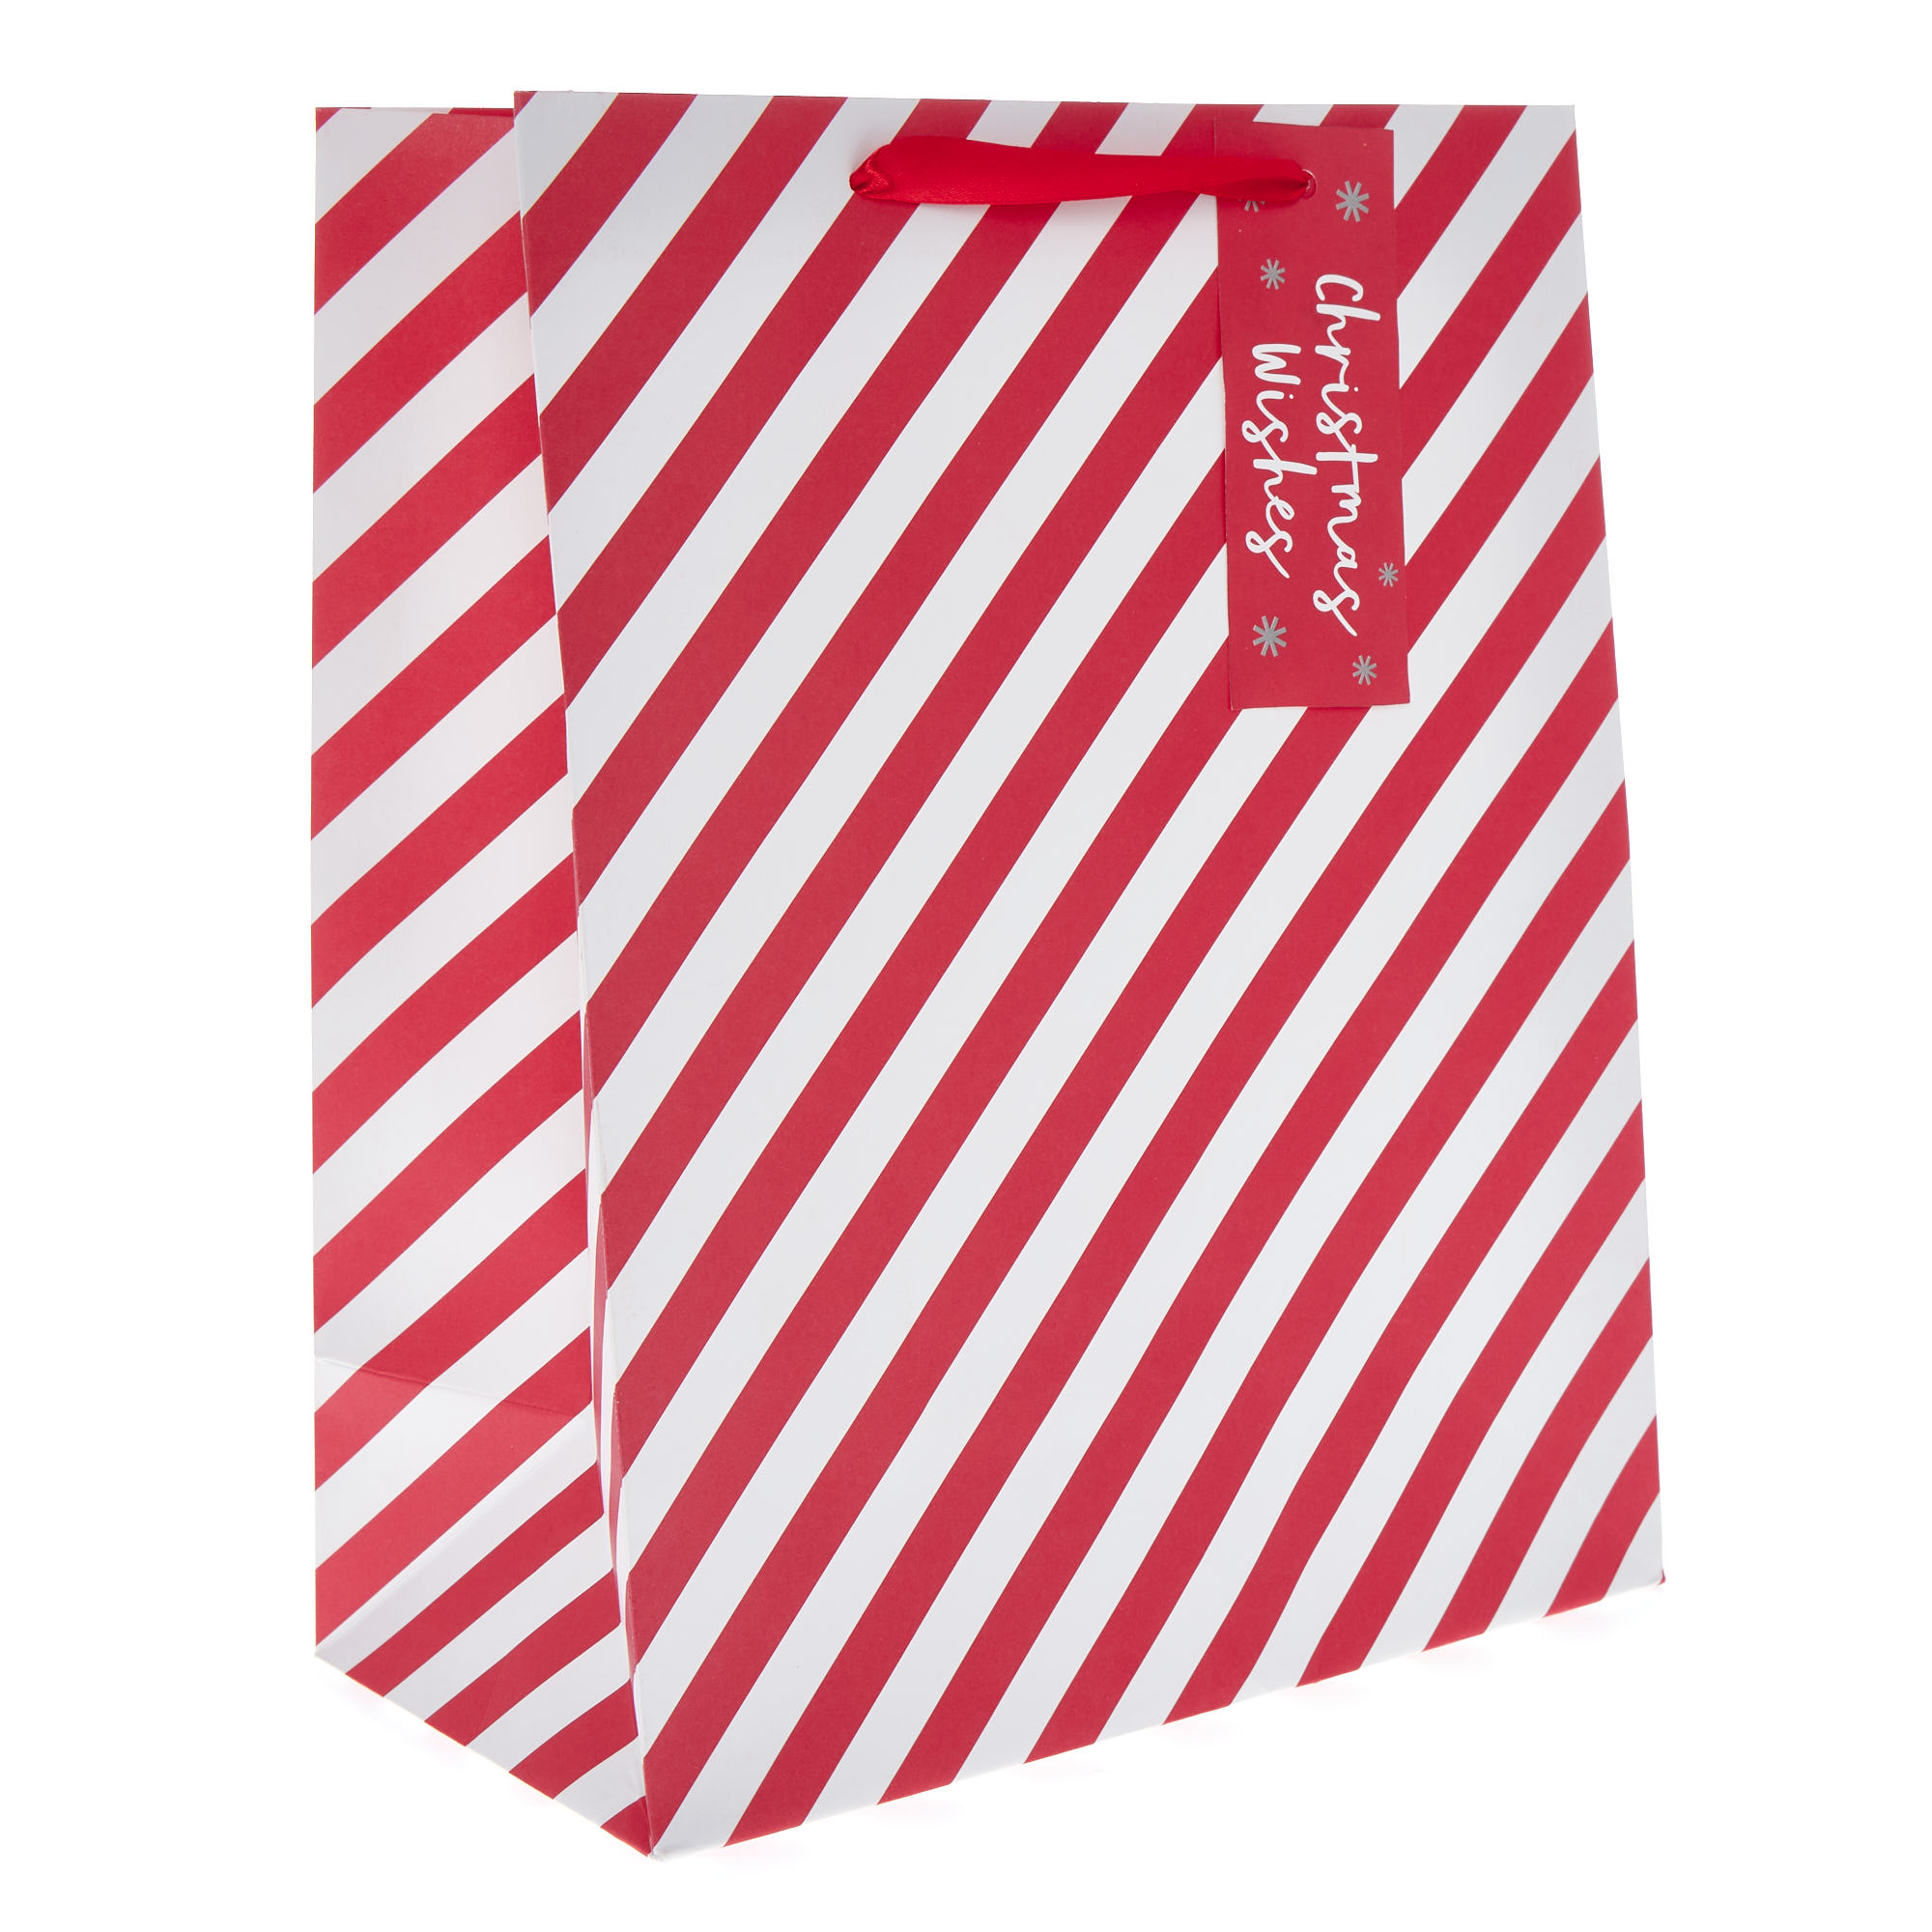 Candy Cane Christmas Wishes Large Portrait Gift Bag